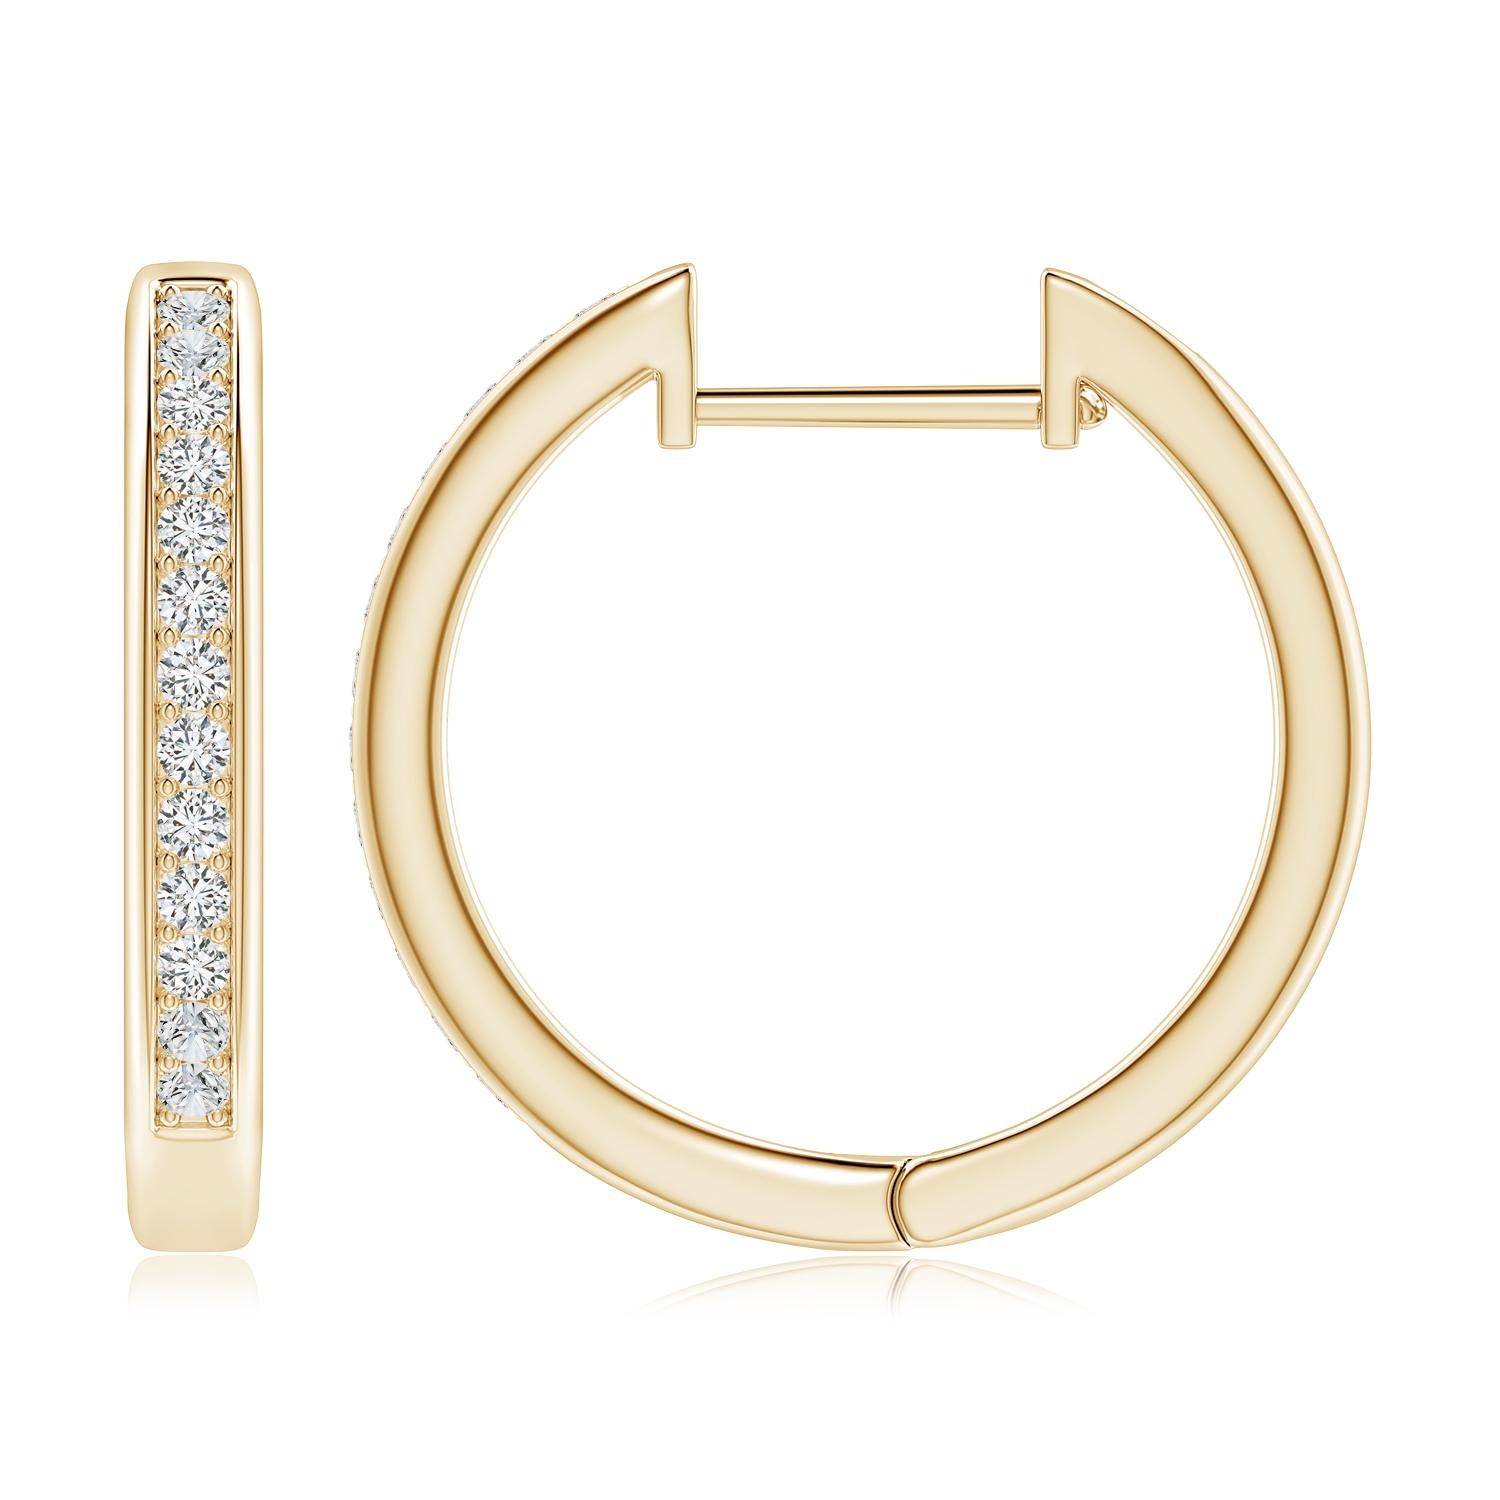 Round Cut Natural Diamond Hoop Earrings in 14K Yellow Gold (0.5cttw  Color-H  Clarity-SI2) For Sale